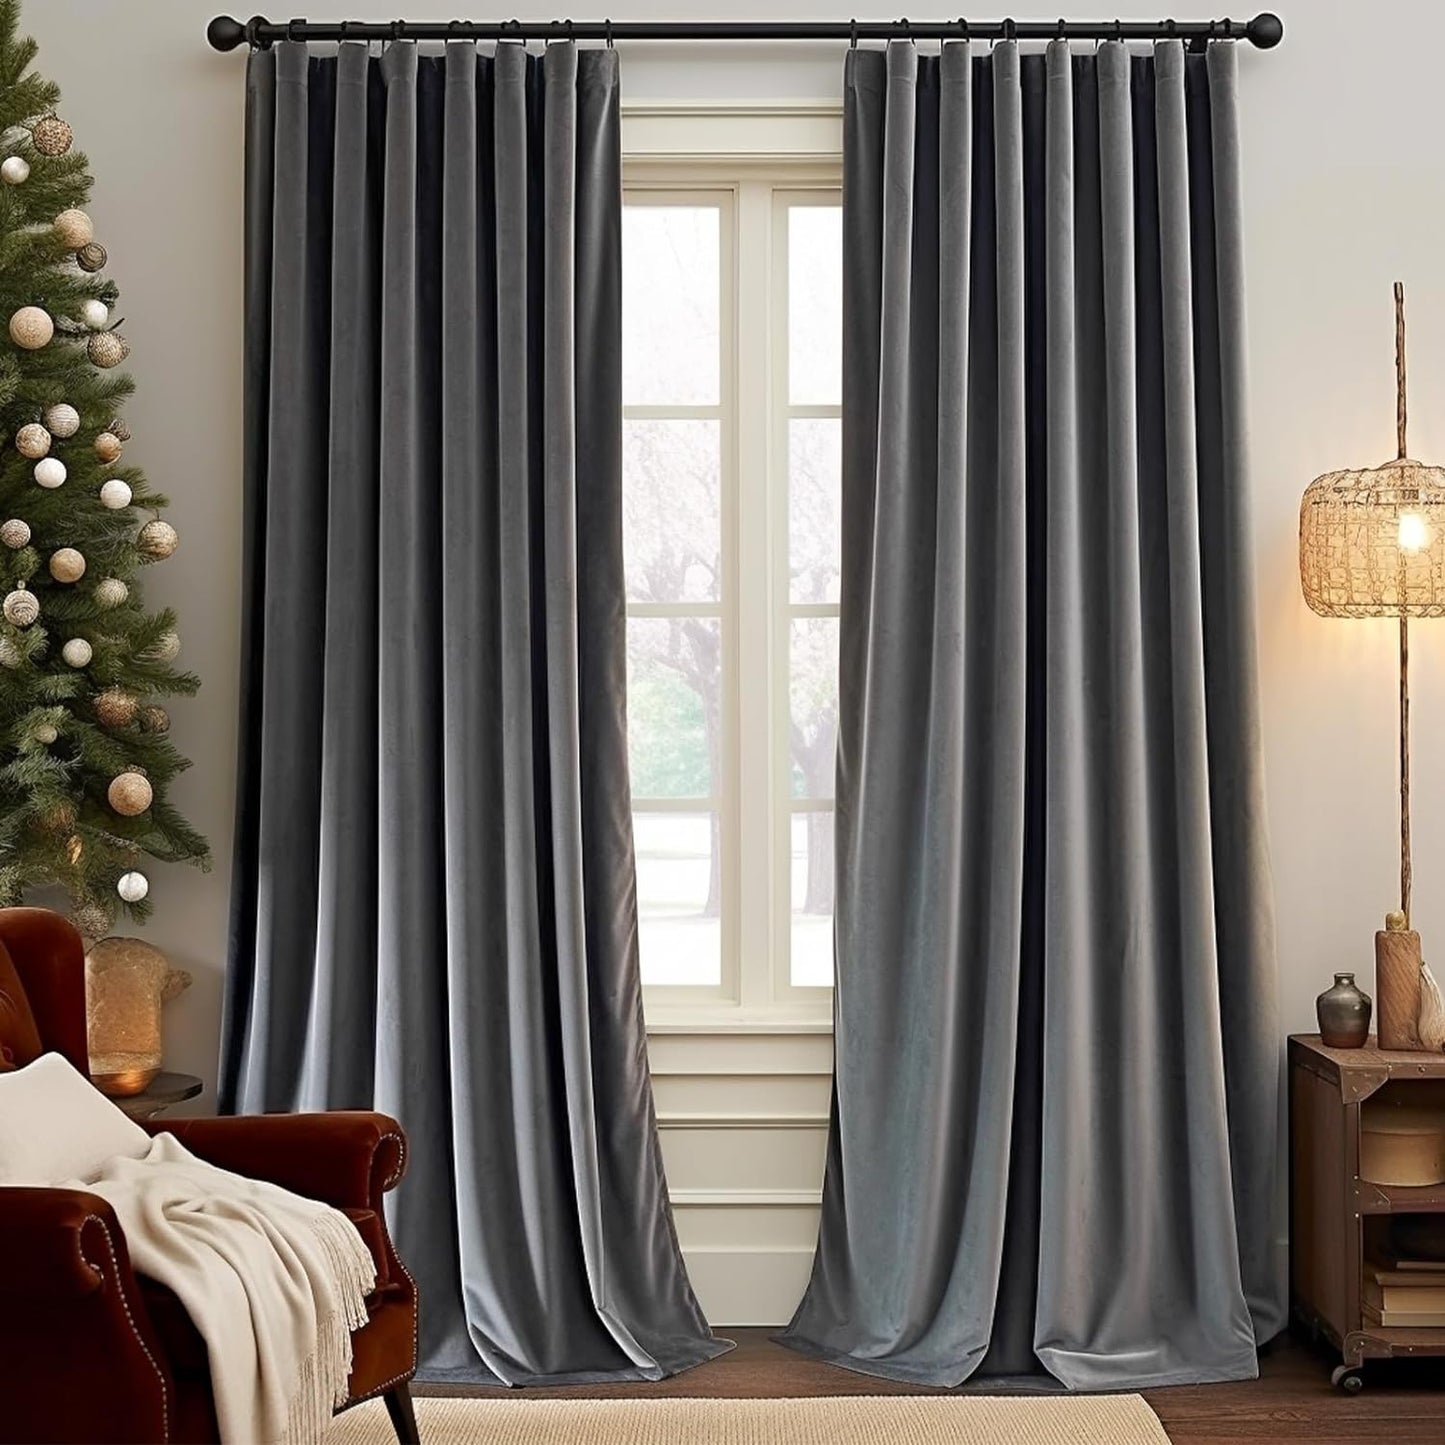 Lazzzy Velvet Blackout Curtains Brown Thermal Insulated Curtains 84 Room Darkening Window Drapes Super Soft Luxury Curtains for Living Room Bedroom Rod Pocket 2 Panels 84 Inch Long Gold Brown  TOPICK Grey W52 X L108 